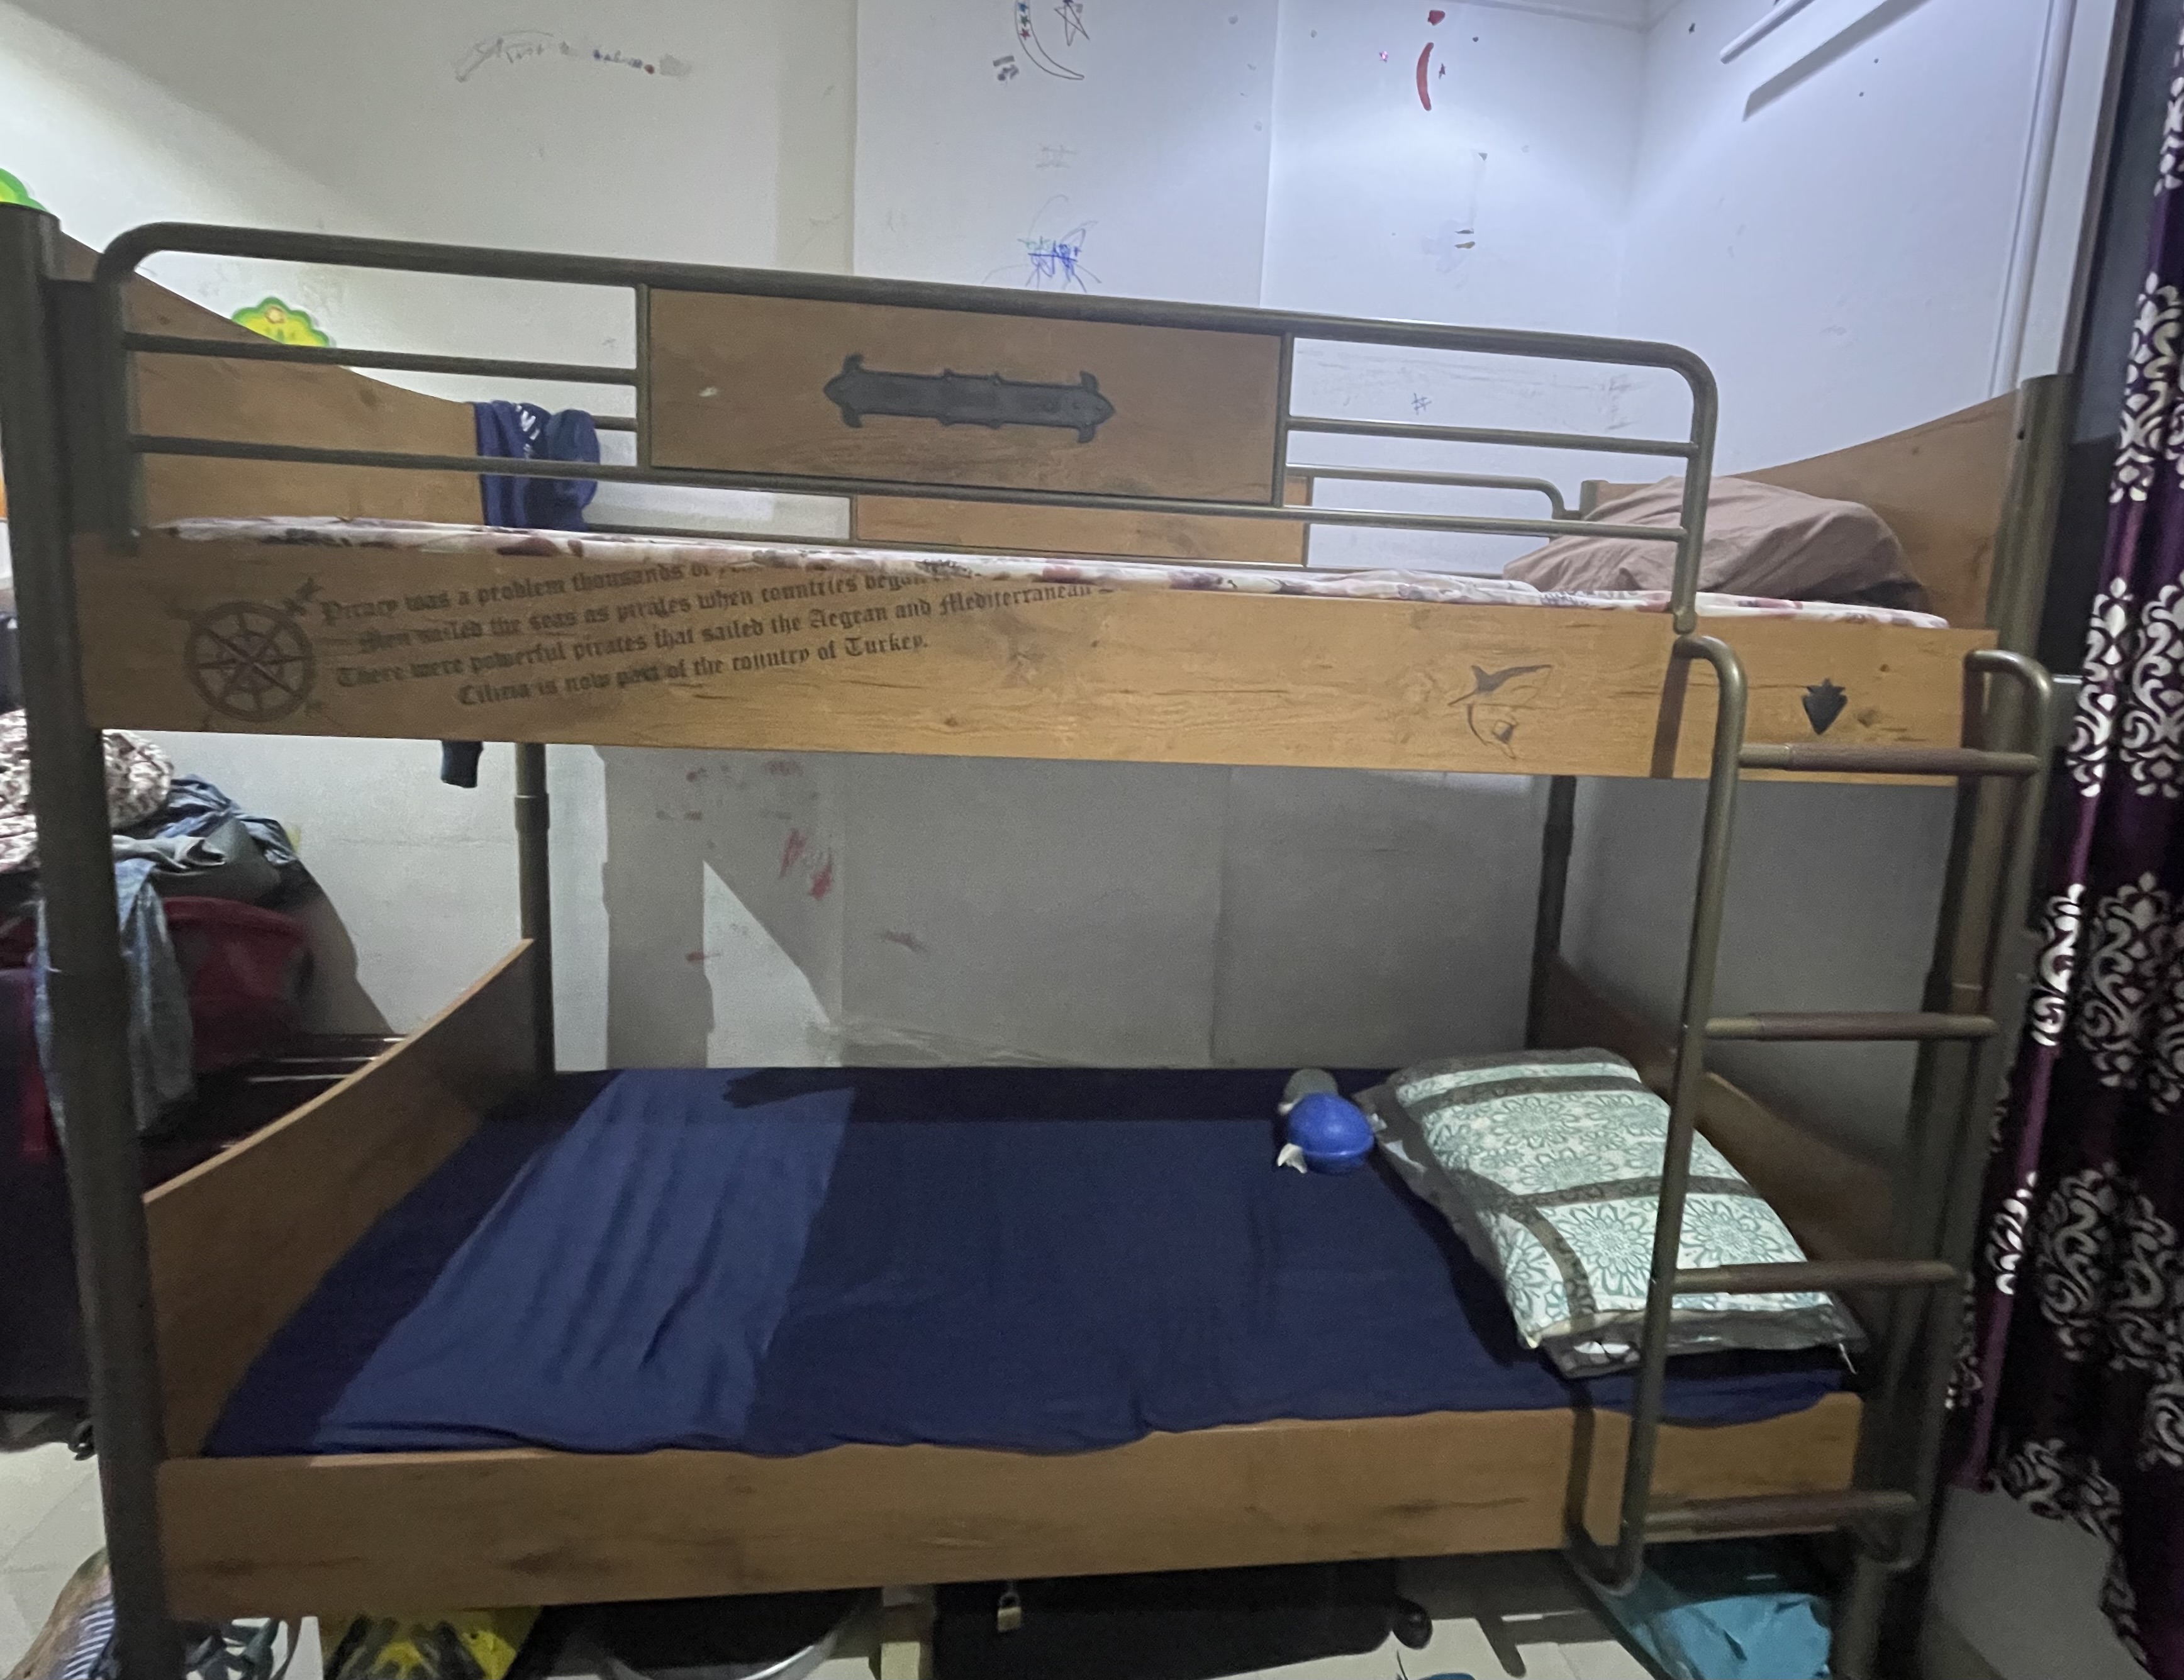 Bunk Bed for Sale